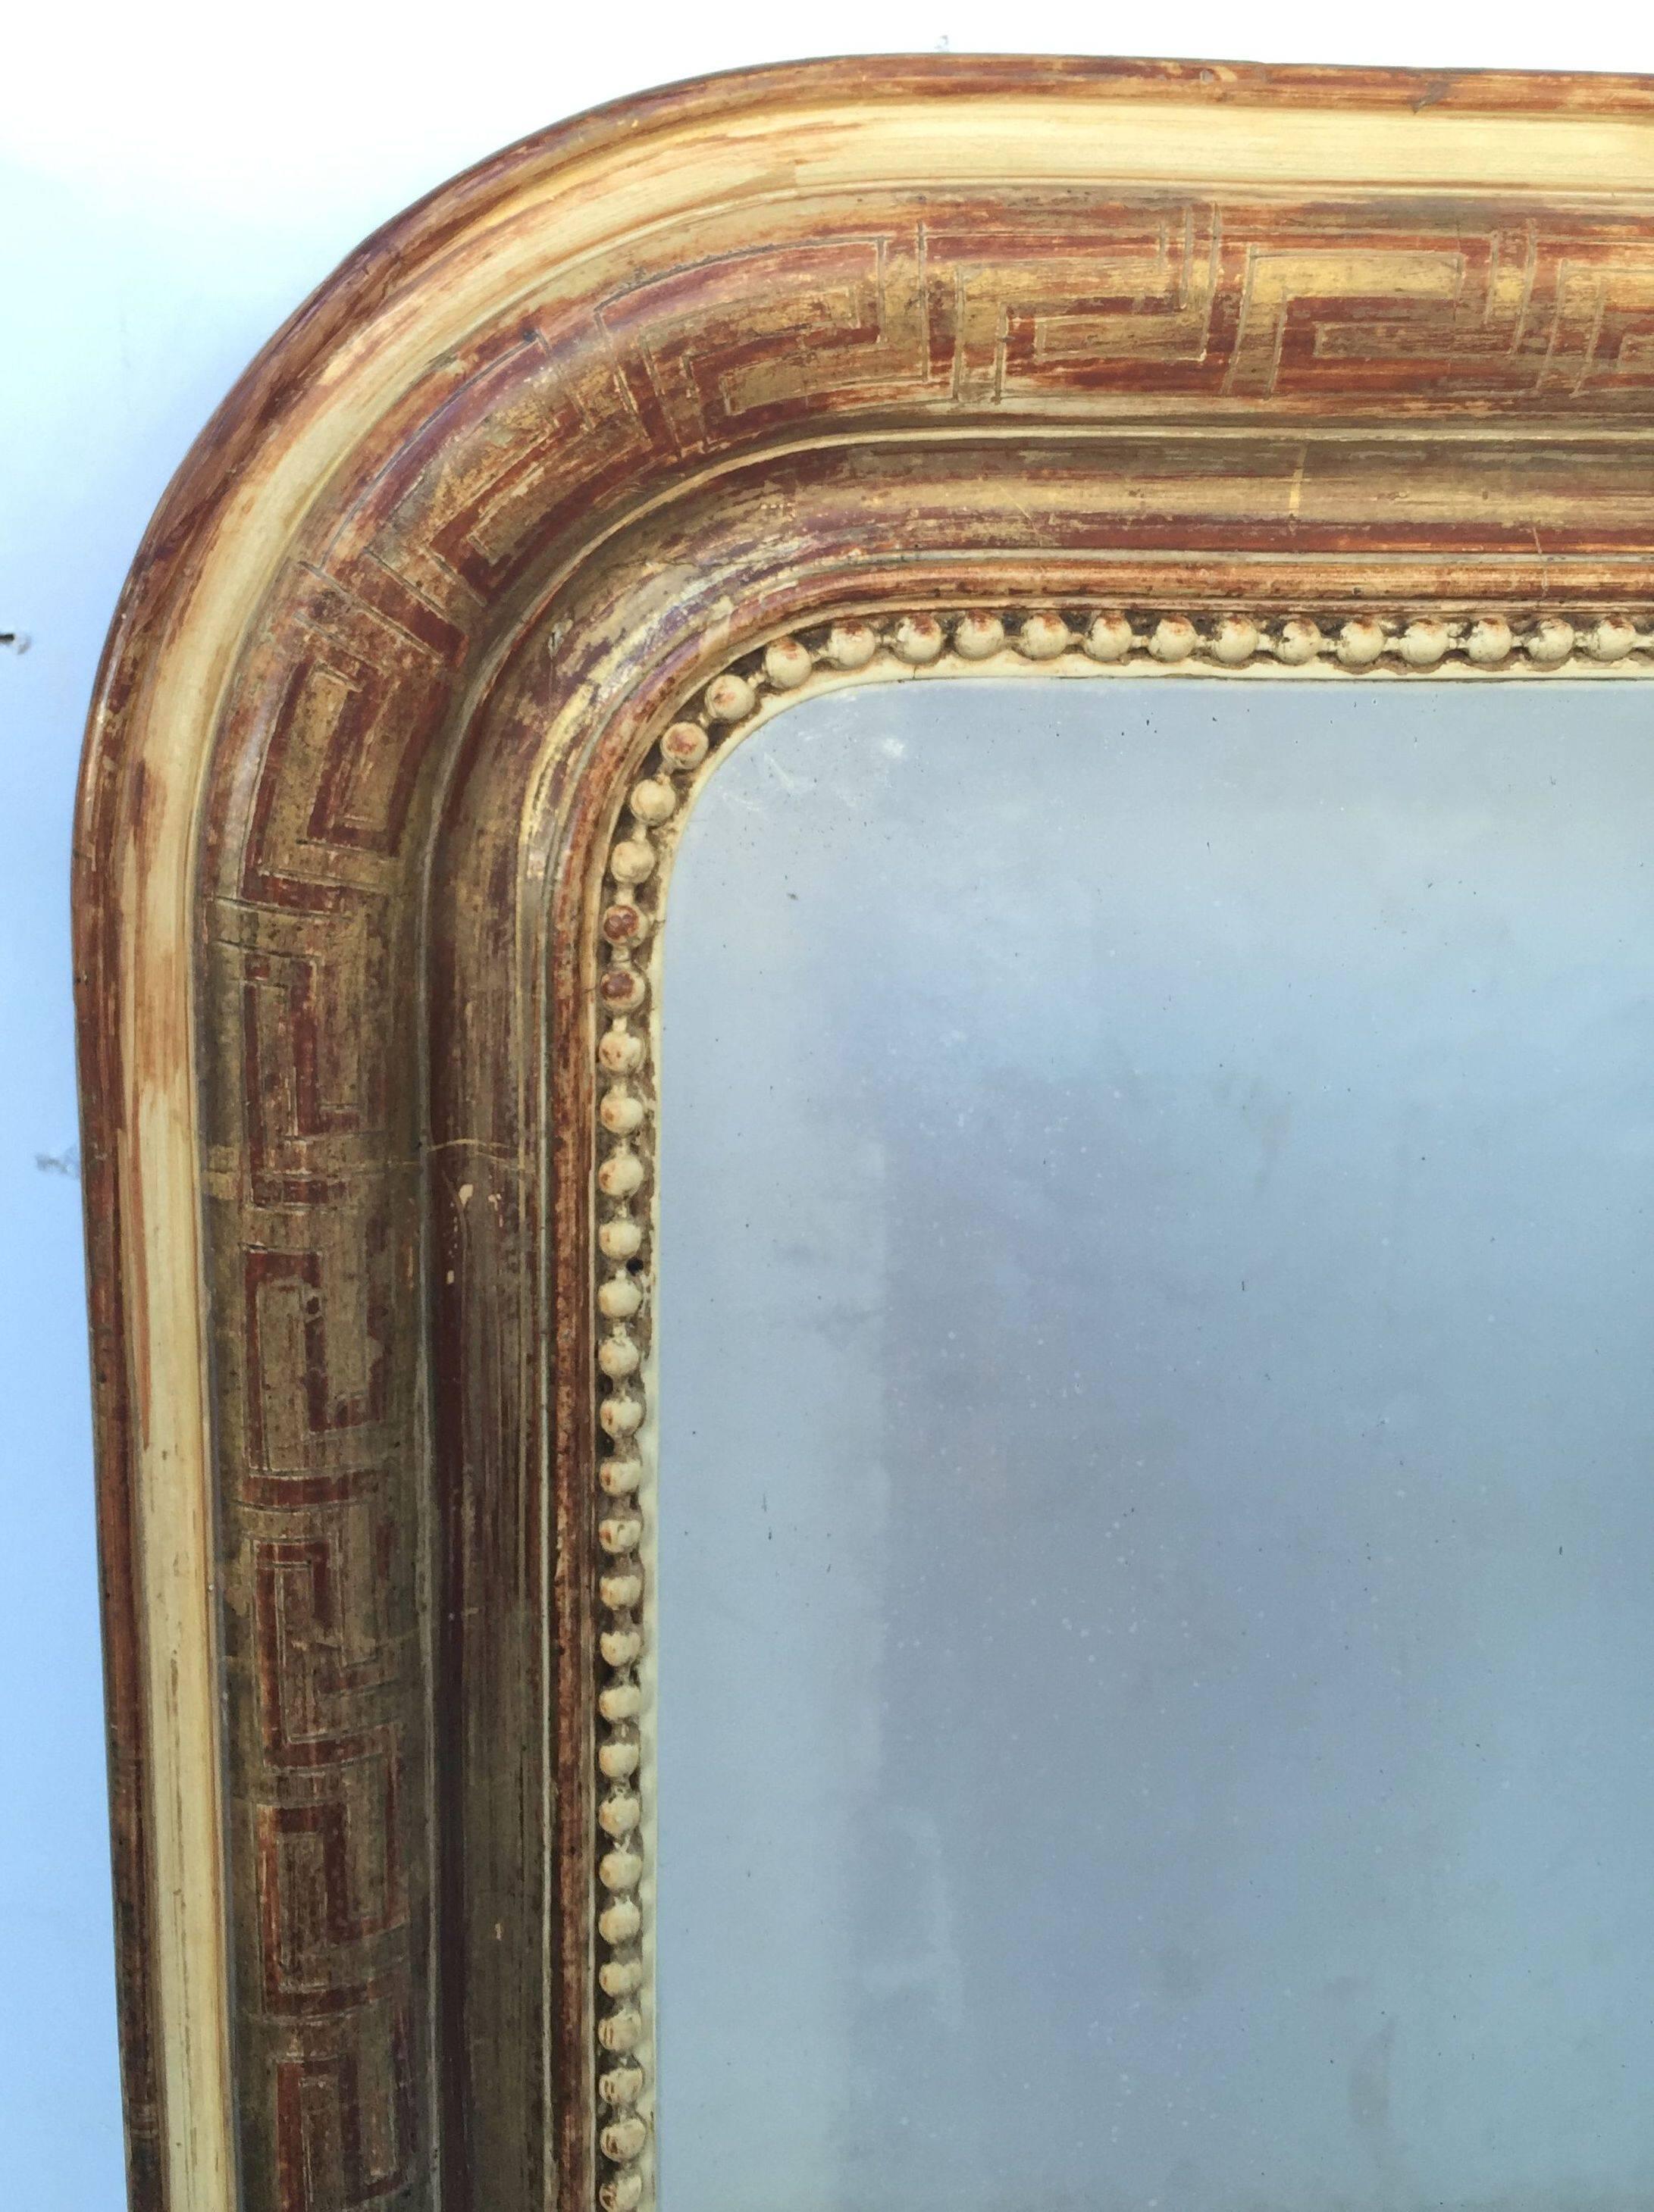 A handsome large Louis Philippe gilt wall mirror from France, featuring a lovely moulded surround and an etched Greek key design showing through gold-leaf.

Dimensions: H 47 1/4 inches x W 35 1/4 inches

Other sizes available in this style.